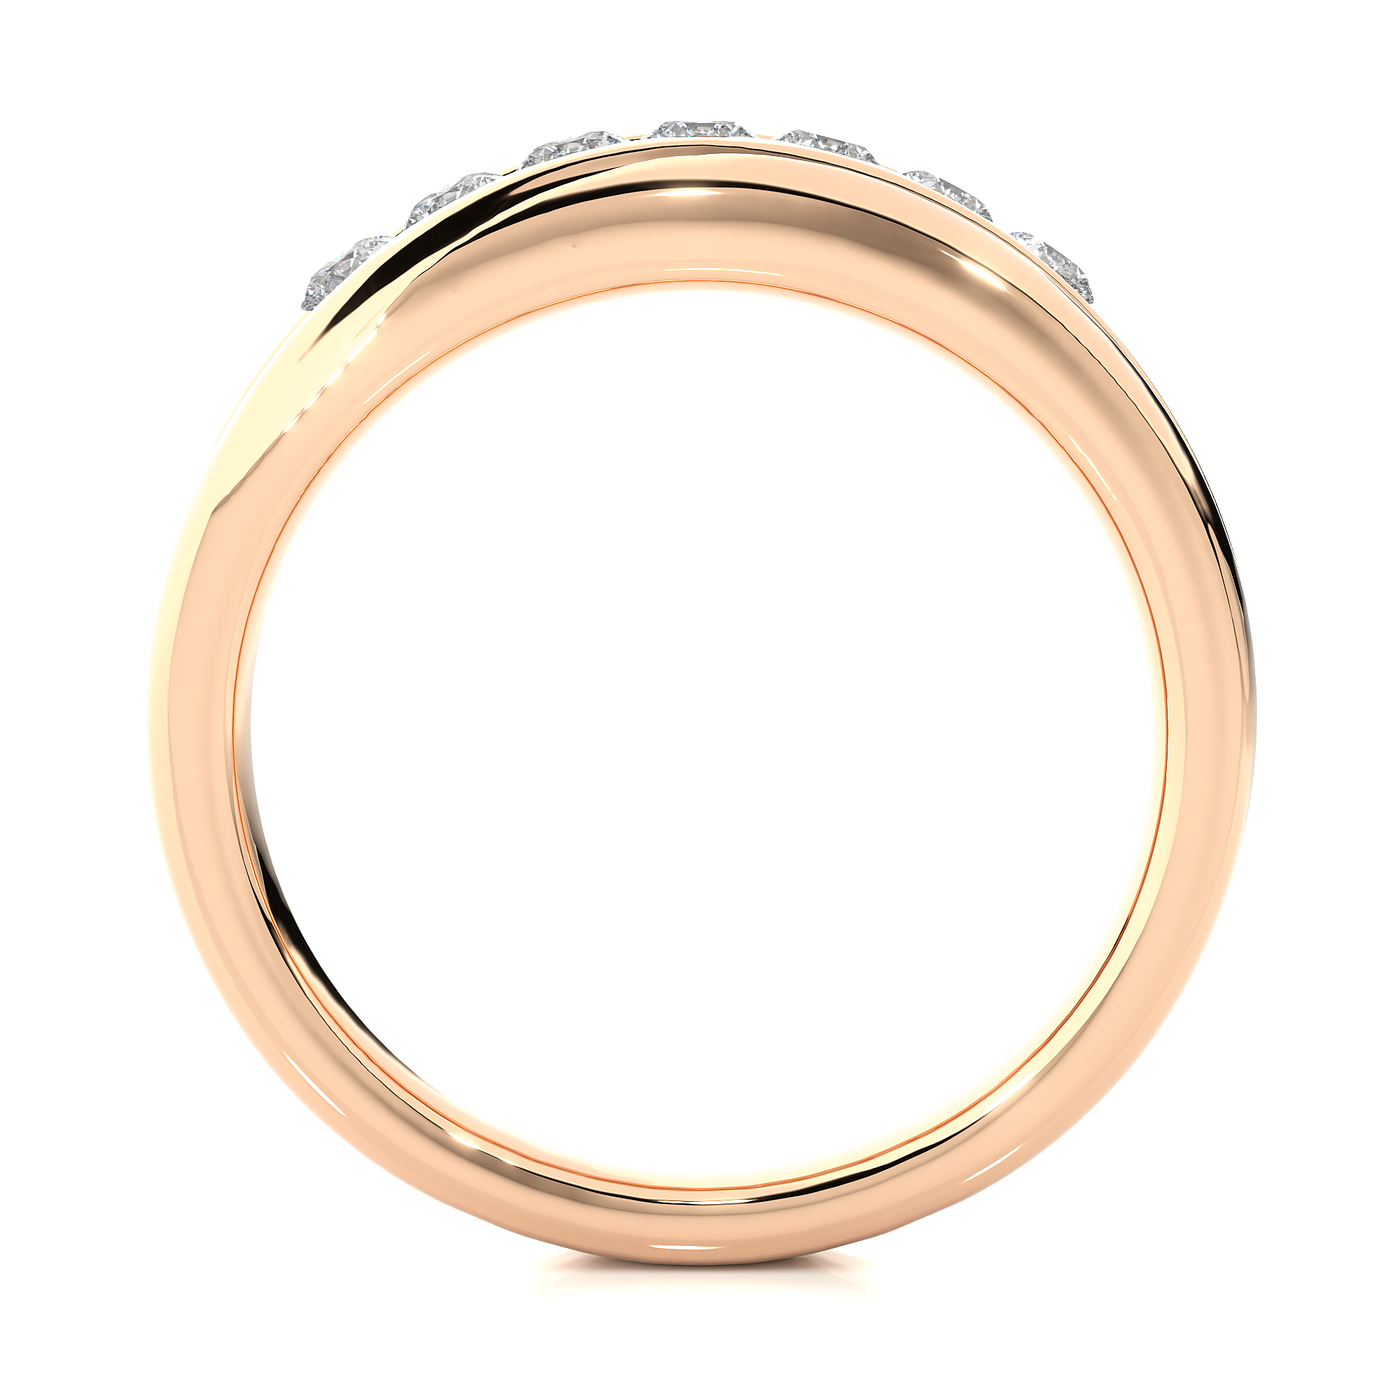 1.5CT Seven Stone Round Moissanite Wedding Band in Rose Gold